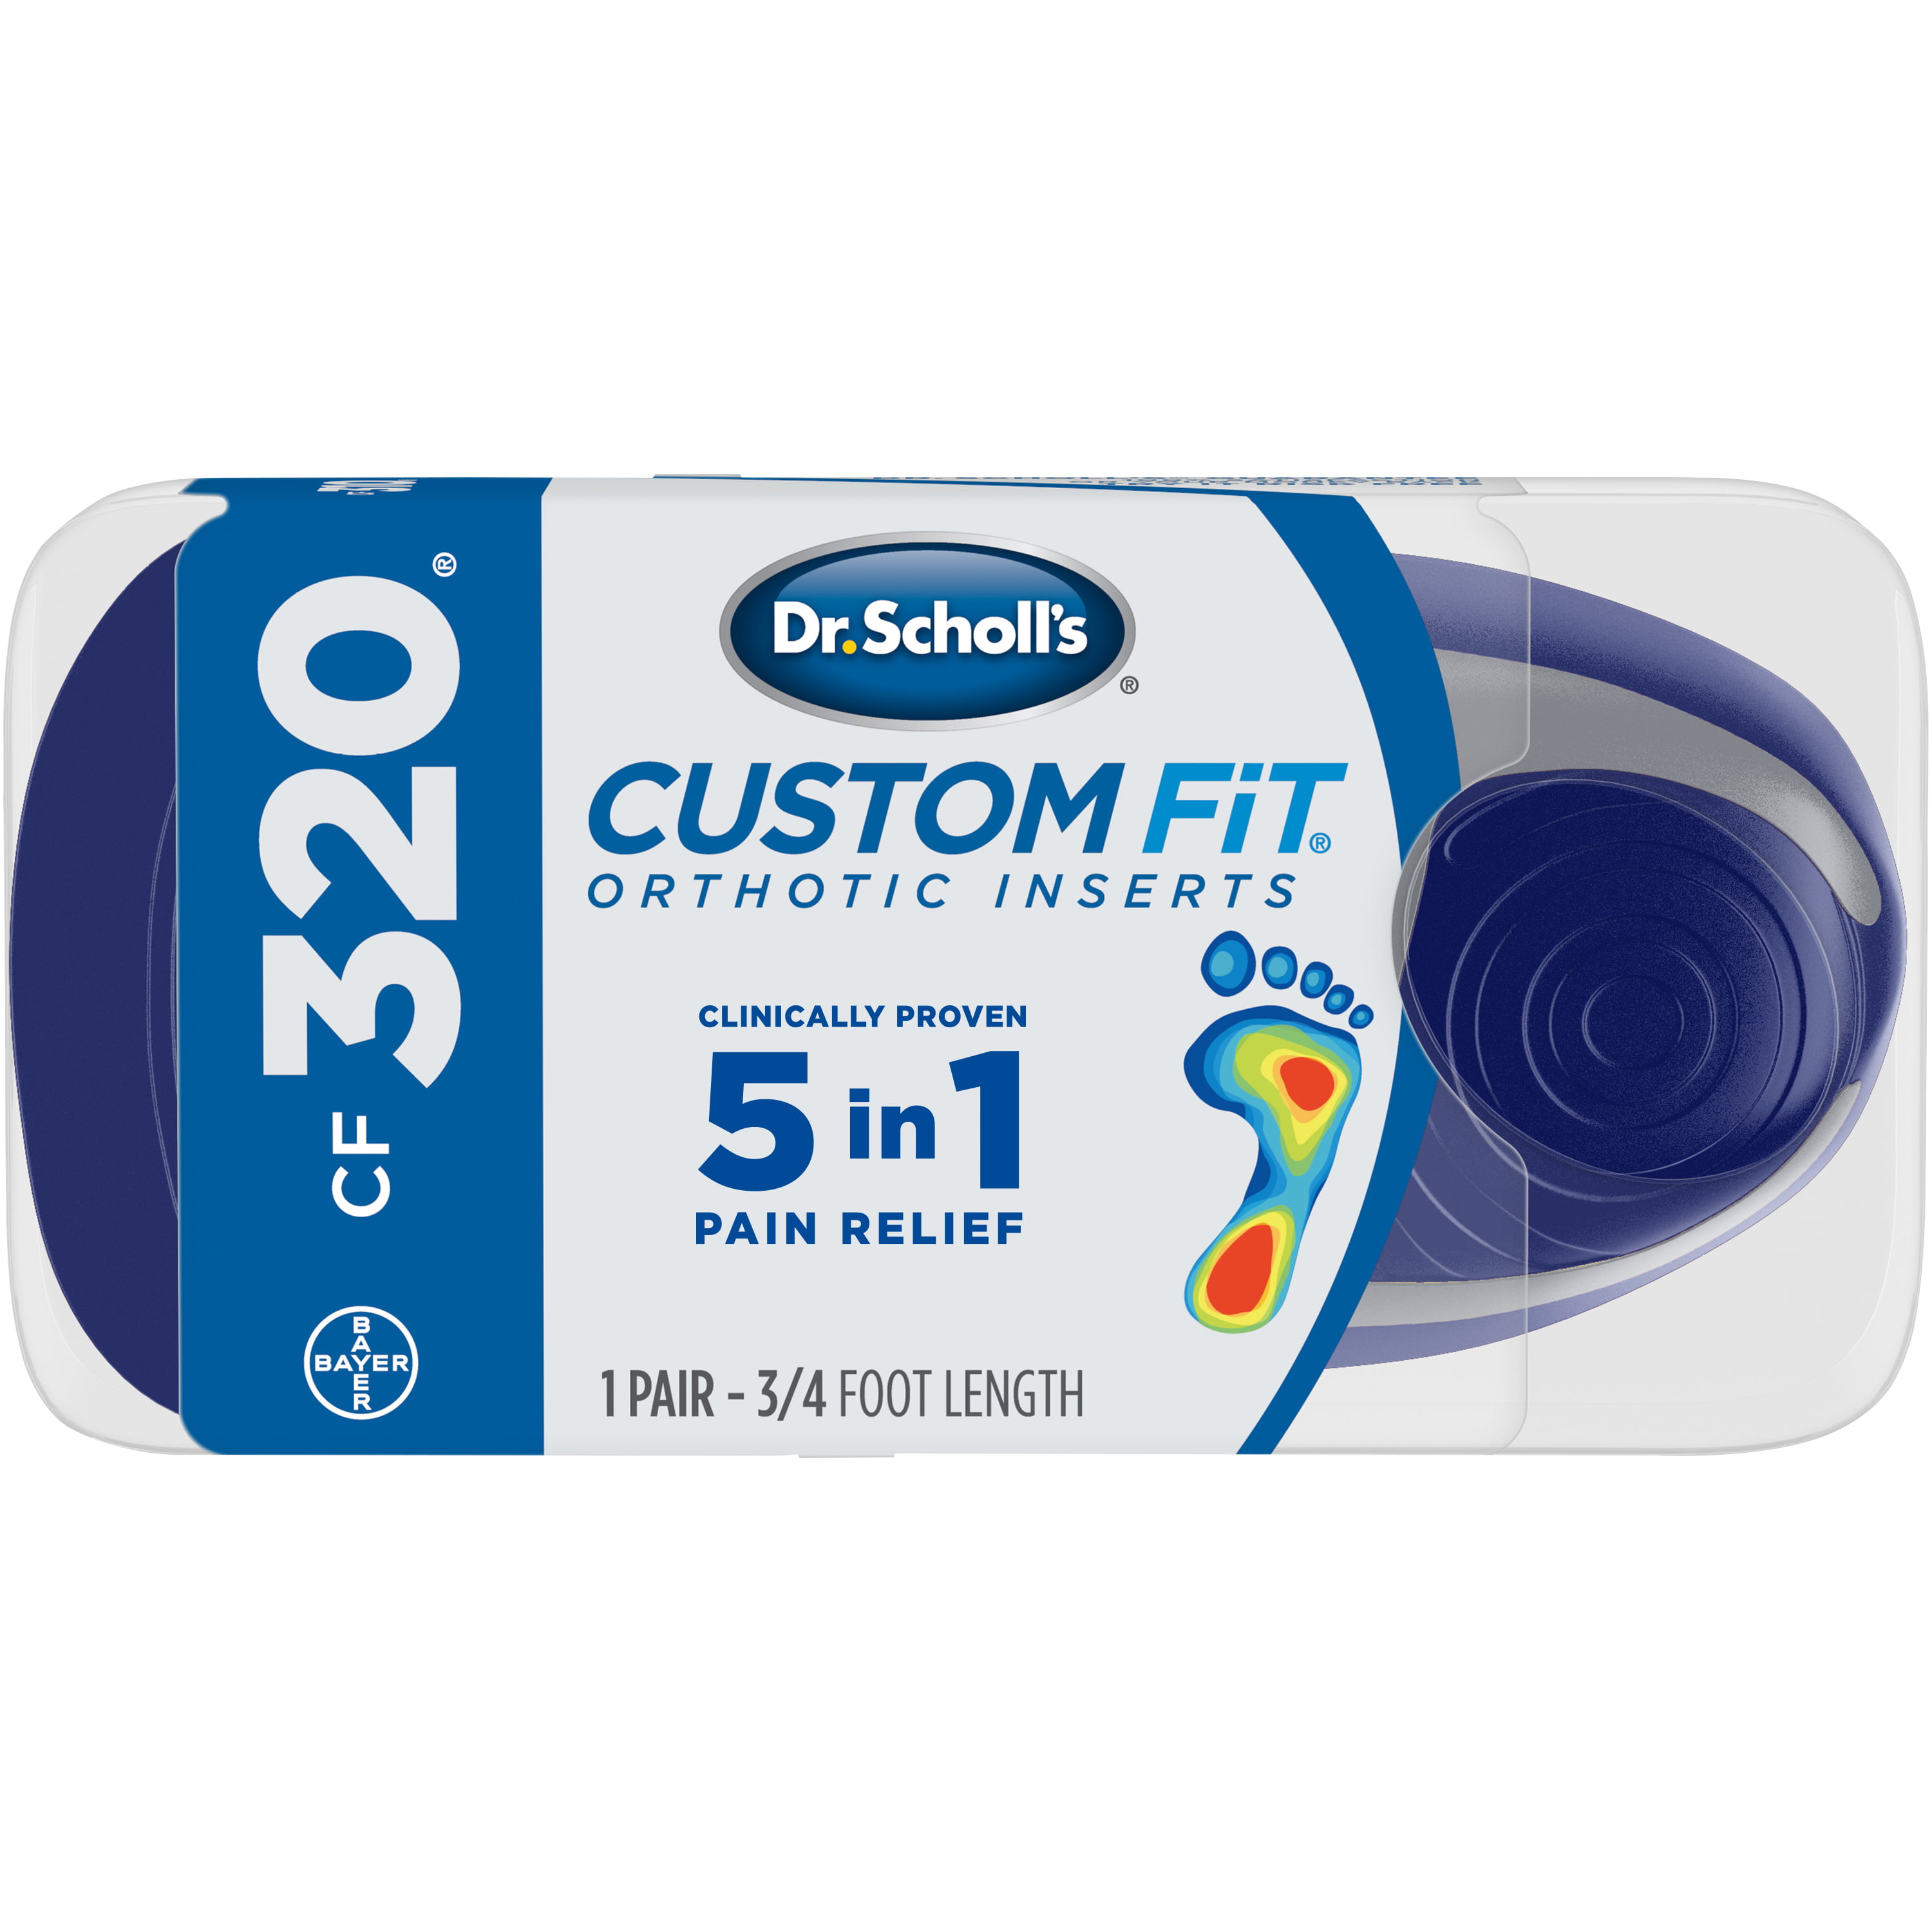 Dr CF 110 Scholl's Custom Fit Orthotic Inserts 